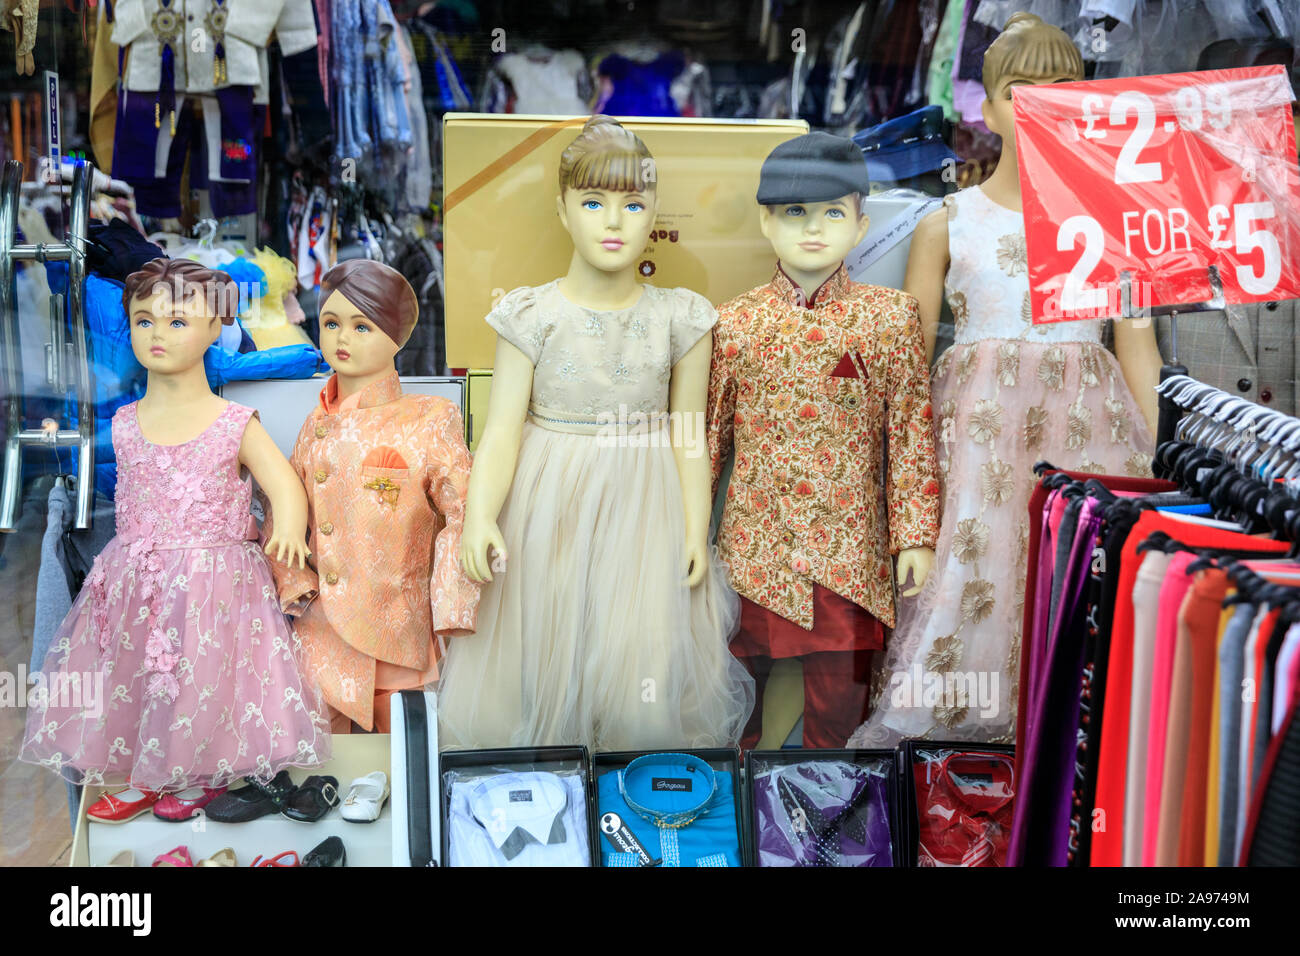 Punjabi, Indian and Asian children's clothes, traditional kids dresses and suit on mannequins in shop window display, Southall, London, UK Stock Photo